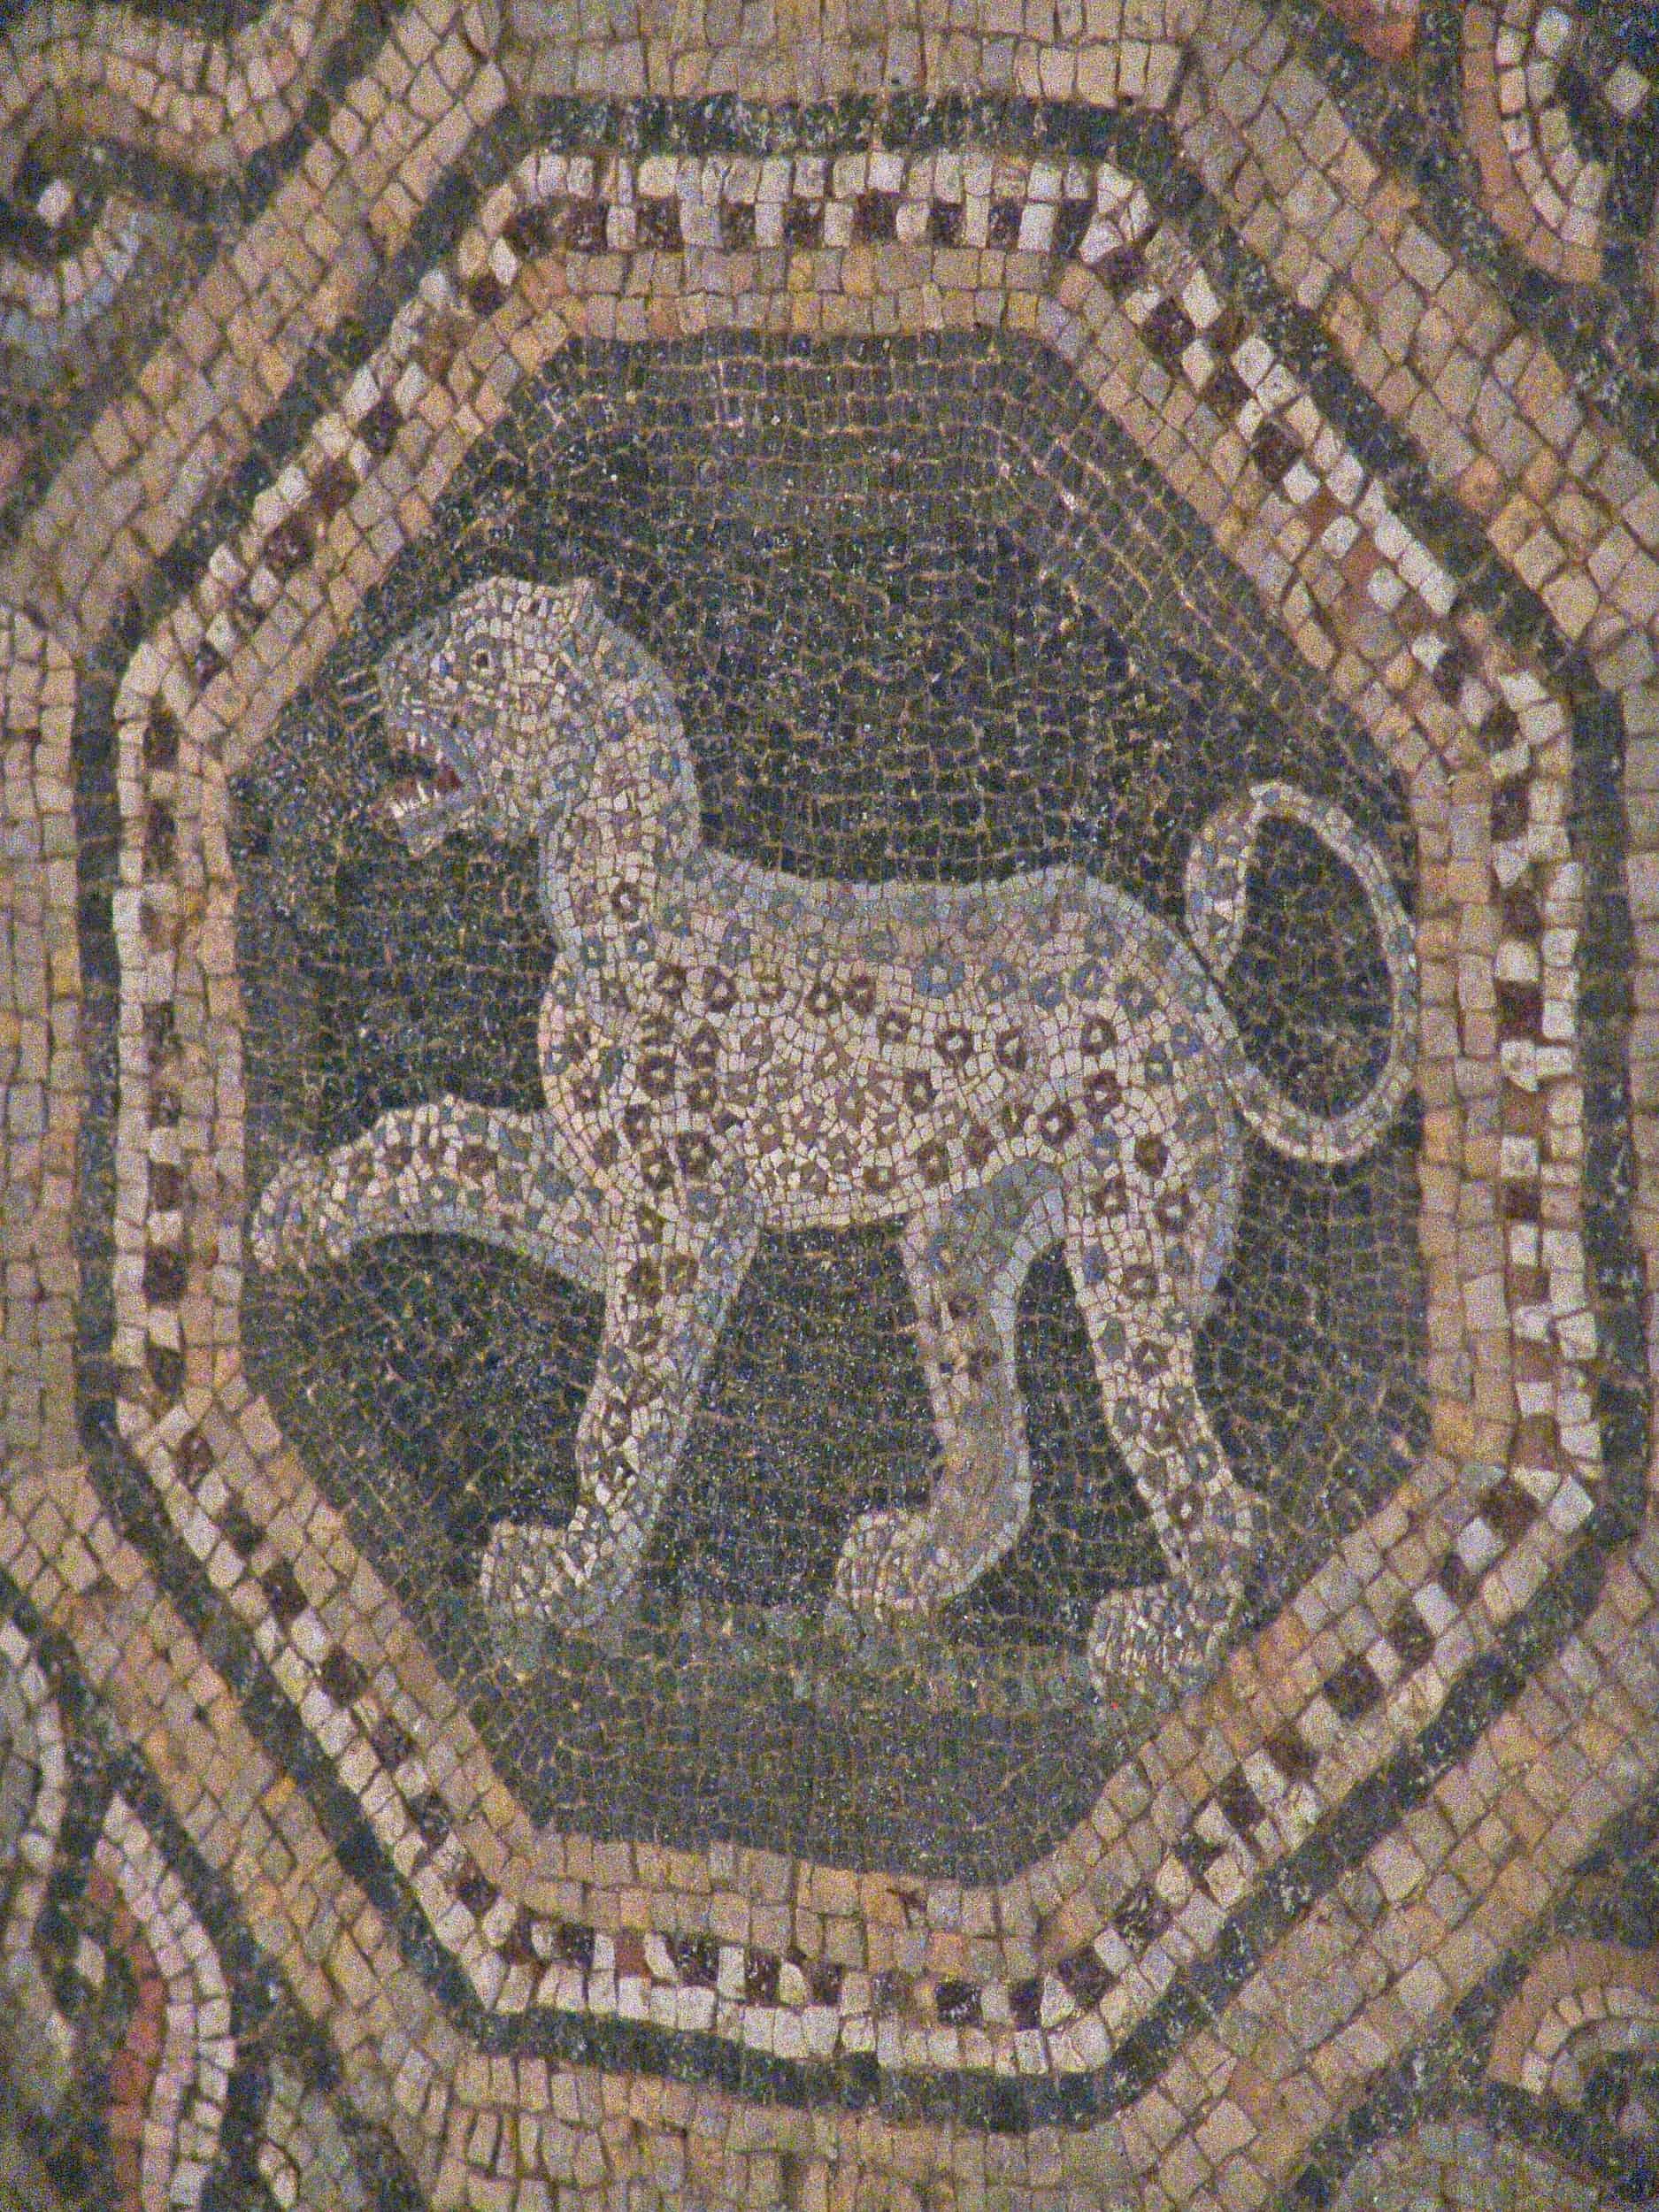 Leopard on a mosaic floor of Building Z